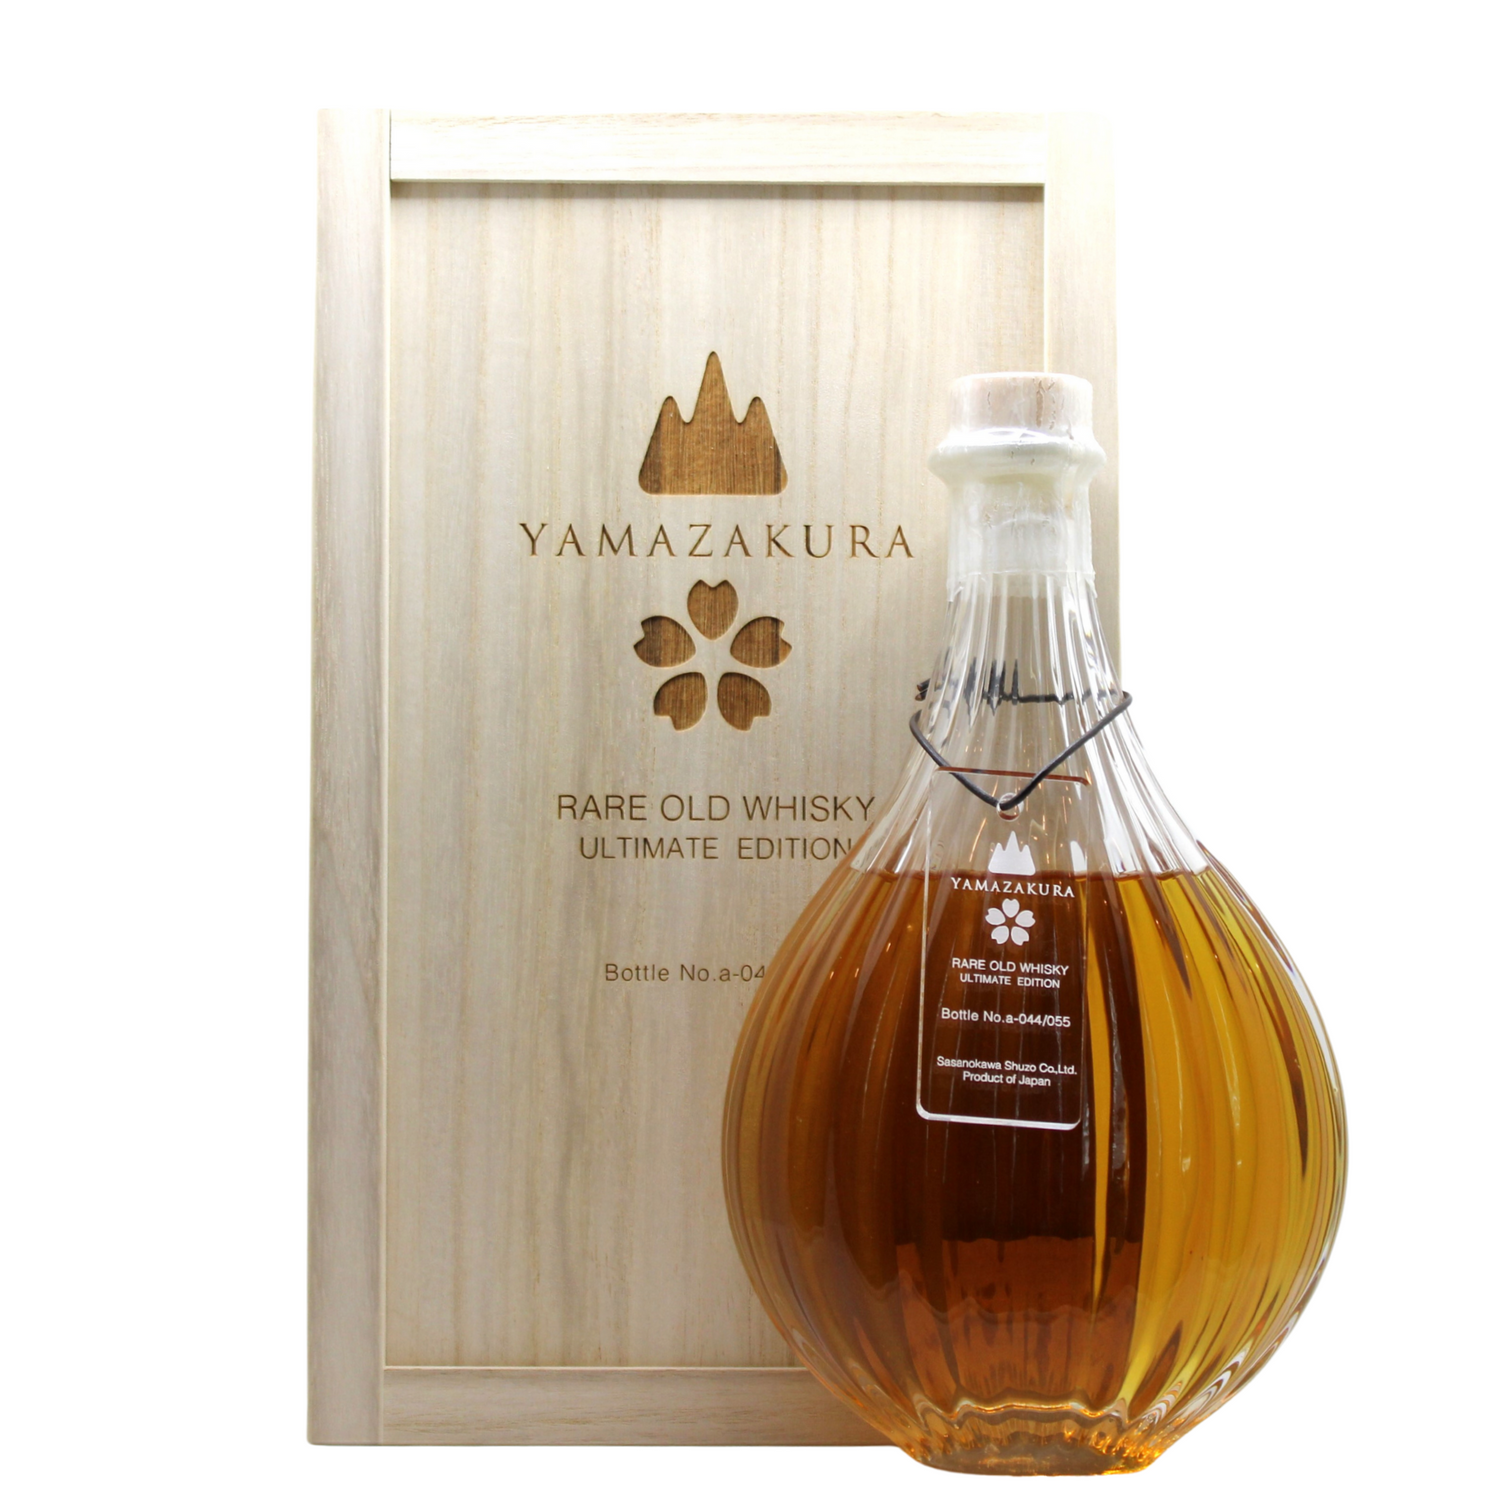 A rare and old whisky from Yamazakura aged for over 35 years. Initially in bourbon cask and reportedly finished for about 1 year in sherry casks. Specially bottled by hand at cask strength, this whisky is elegant, excellently balanced and rounded yet offering a variety of flavours including crisp buttered toast, ripe apricots with an oily texture and a lingering warm finish. 